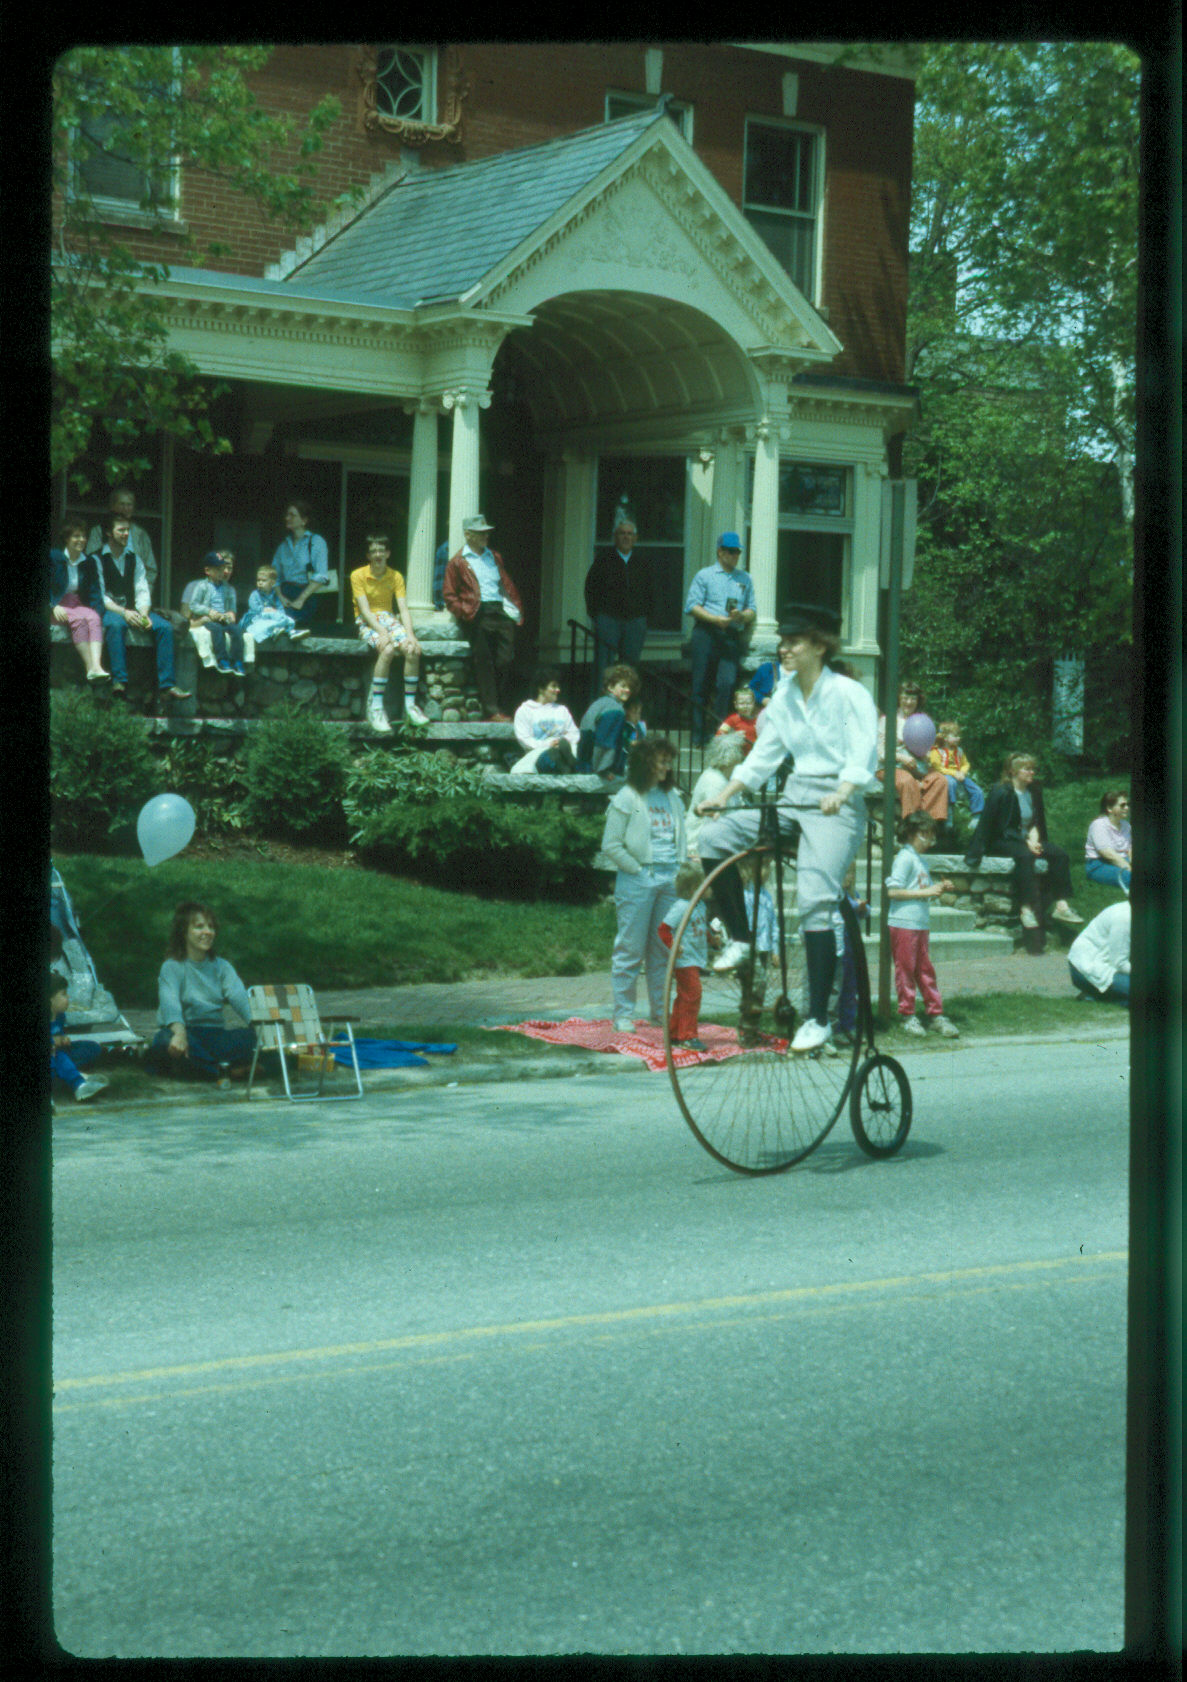 Maine Parade 1987 Frye and Main Street